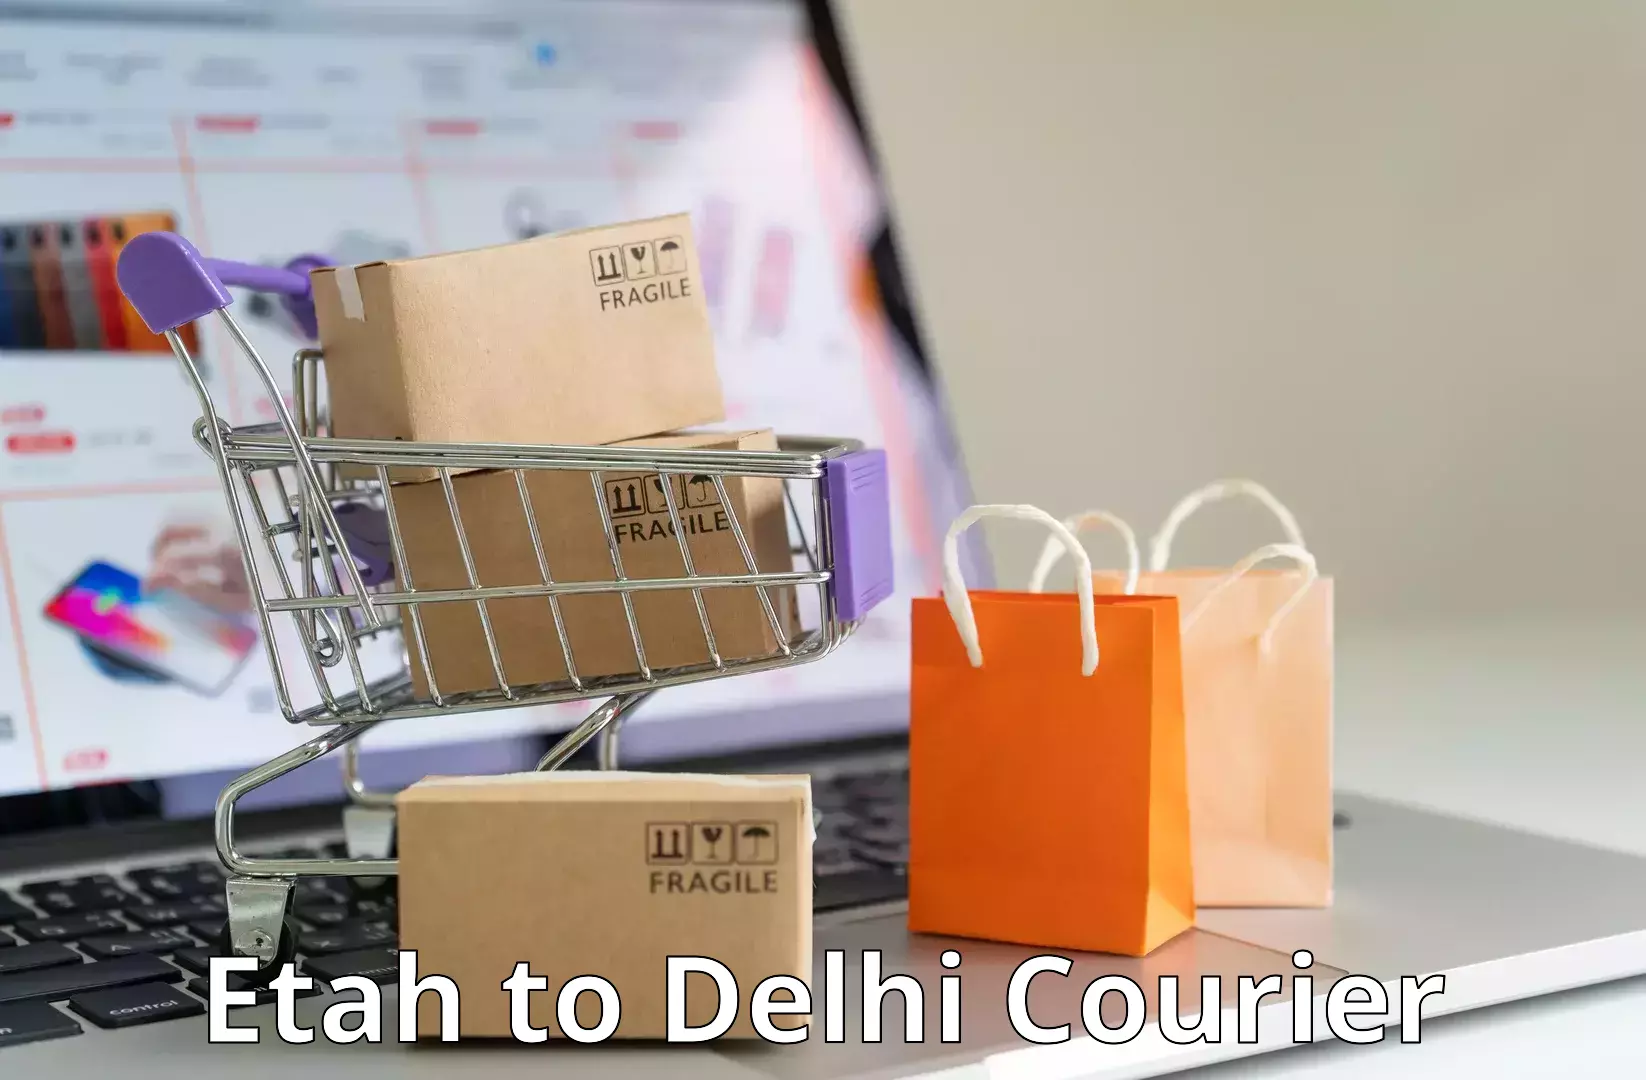 On-call courier service Etah to Lodhi Road